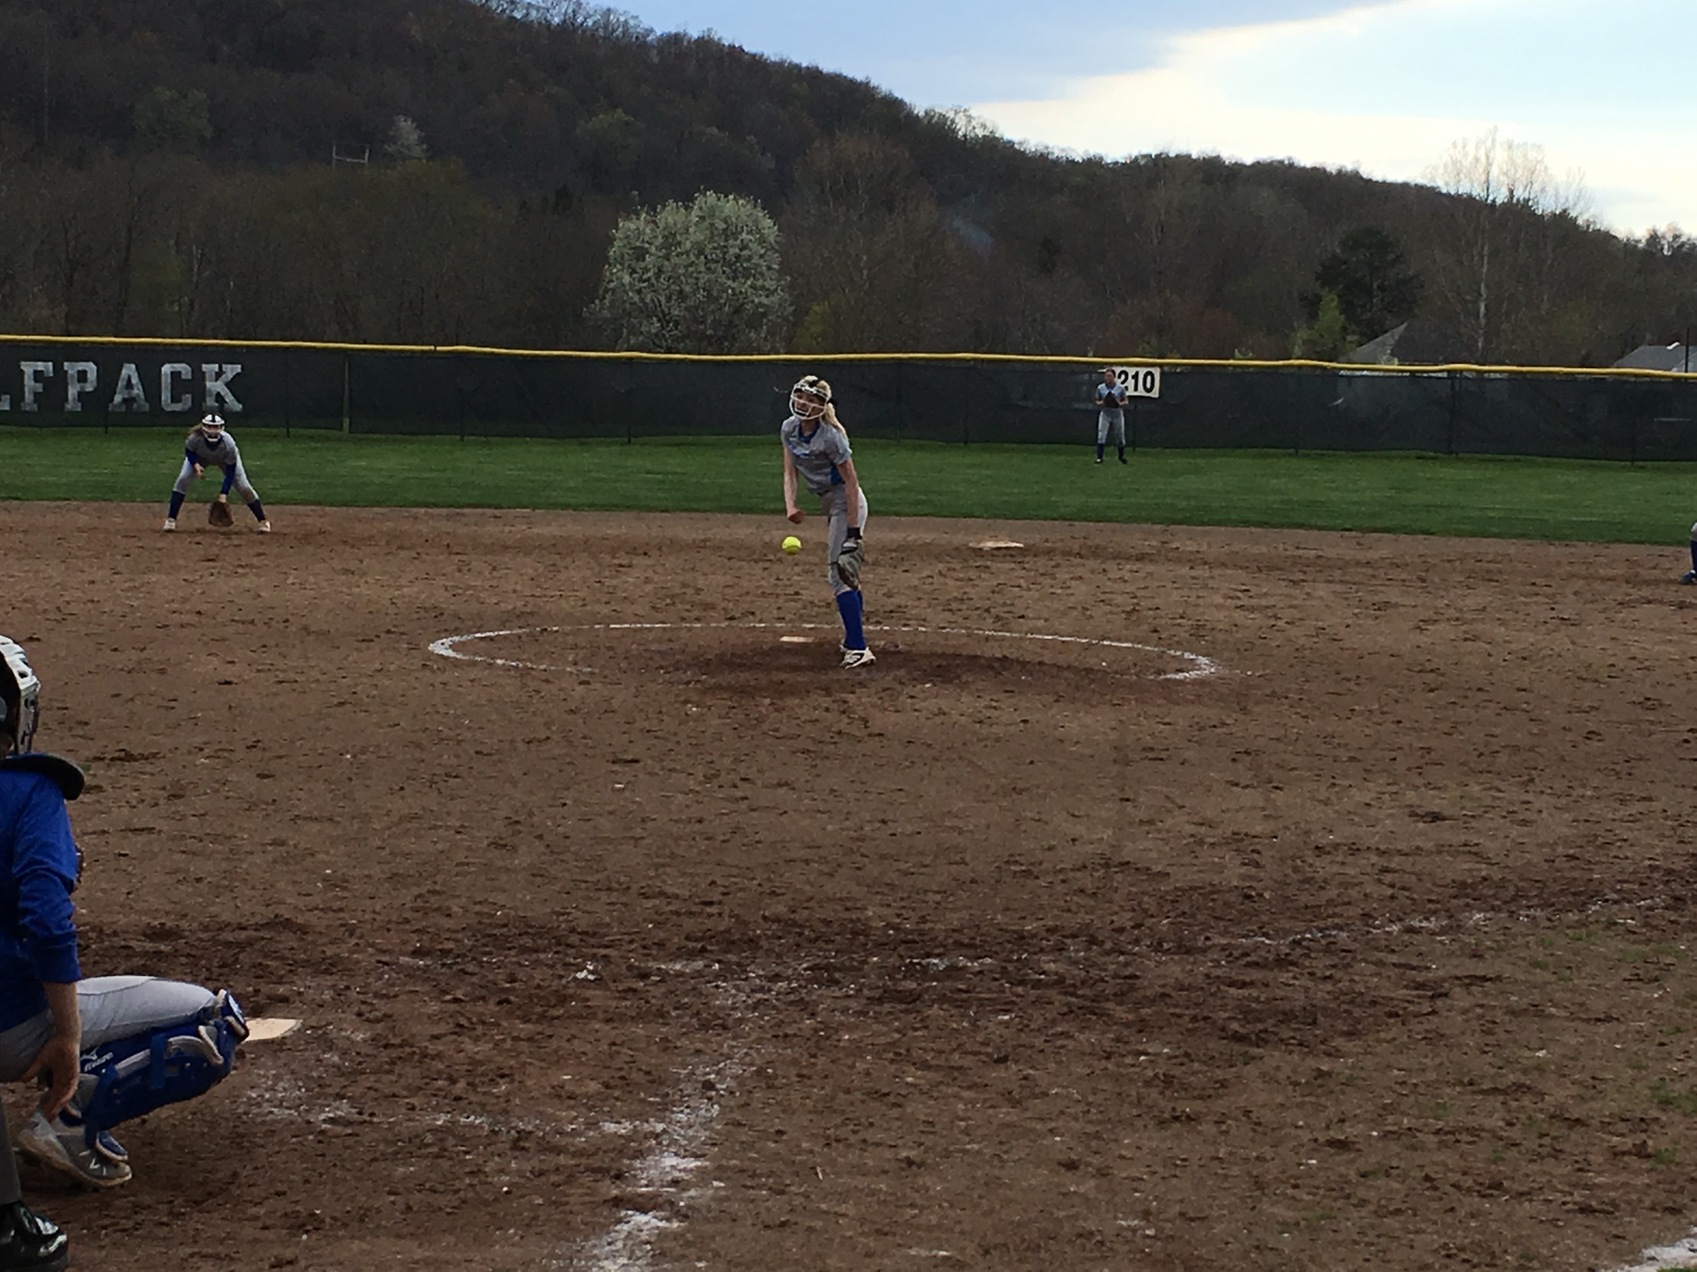 Chelsi Bartlow held a potent Potomac State offense to just two runs Tuesday's second game.